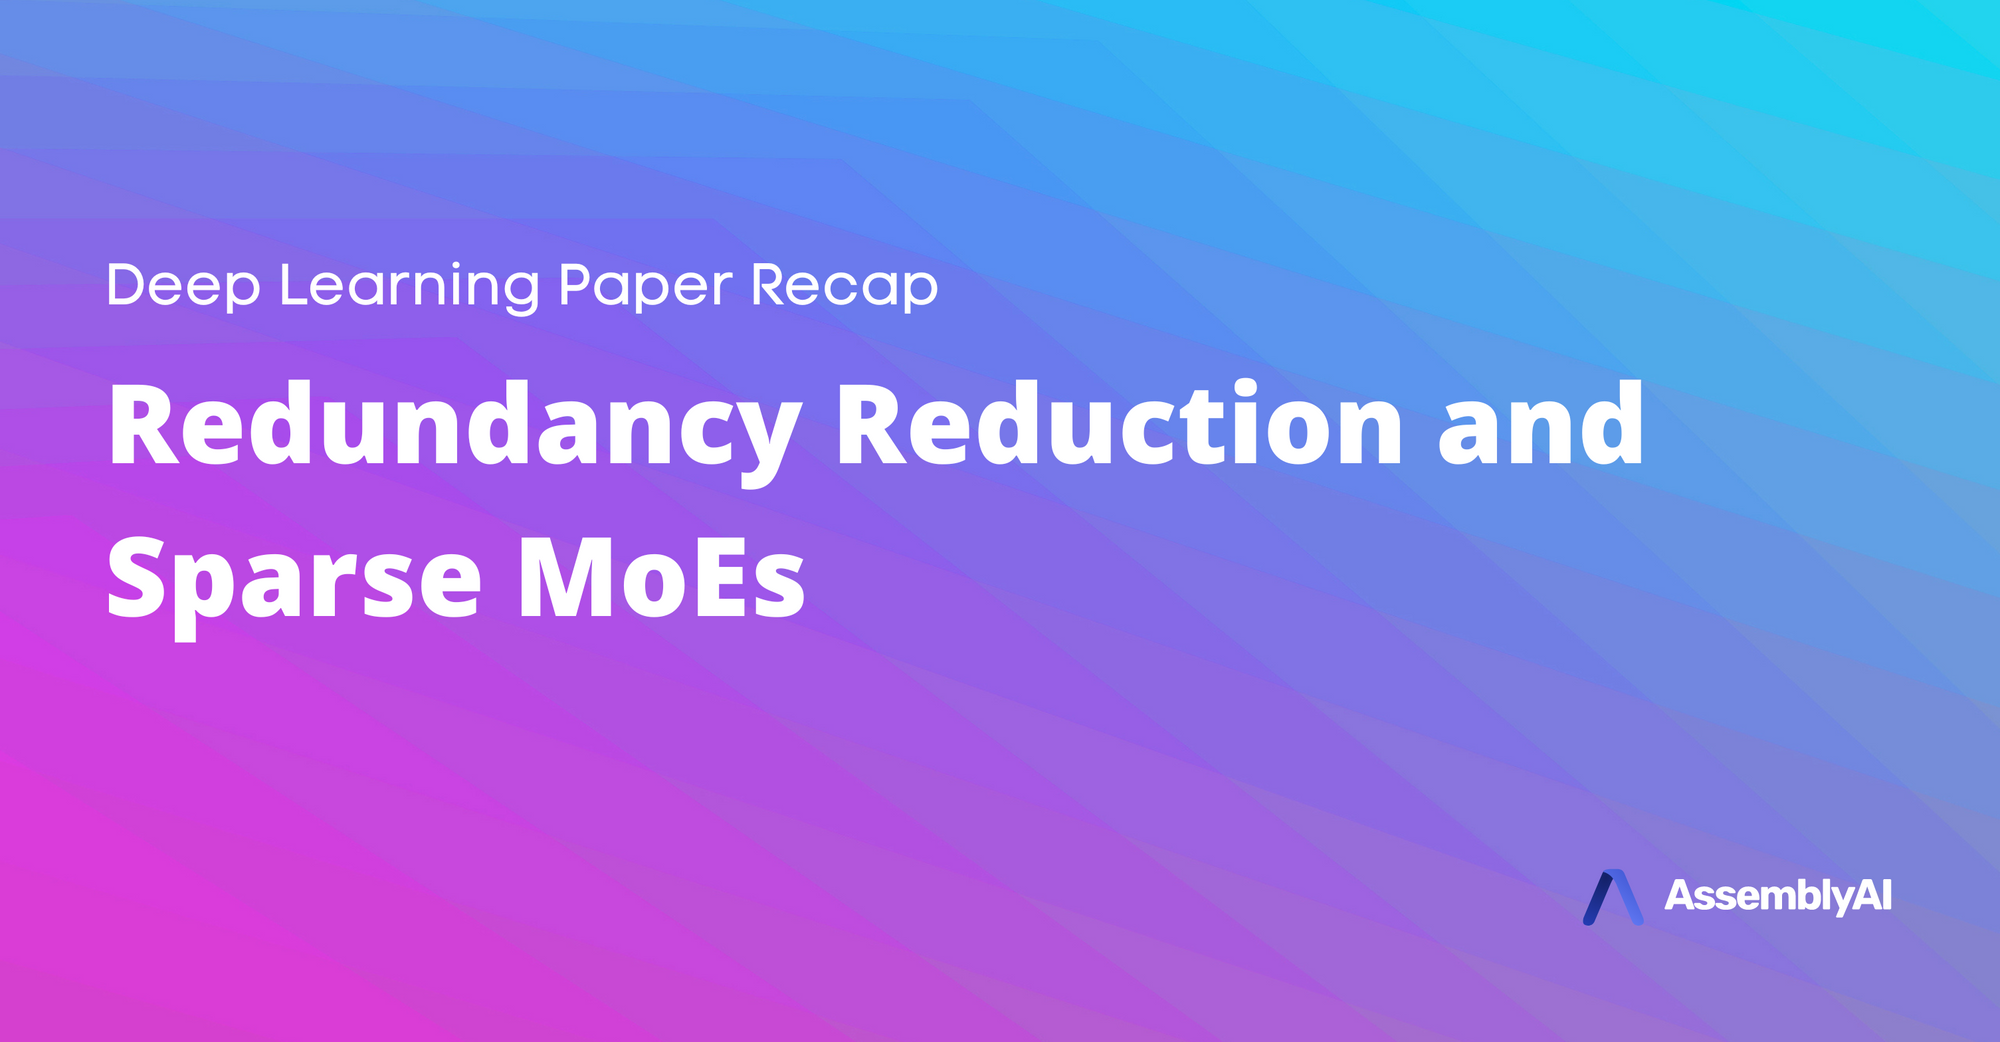 Deep Learning Paper Recap - Redundancy Reduction and Sparse MoEs